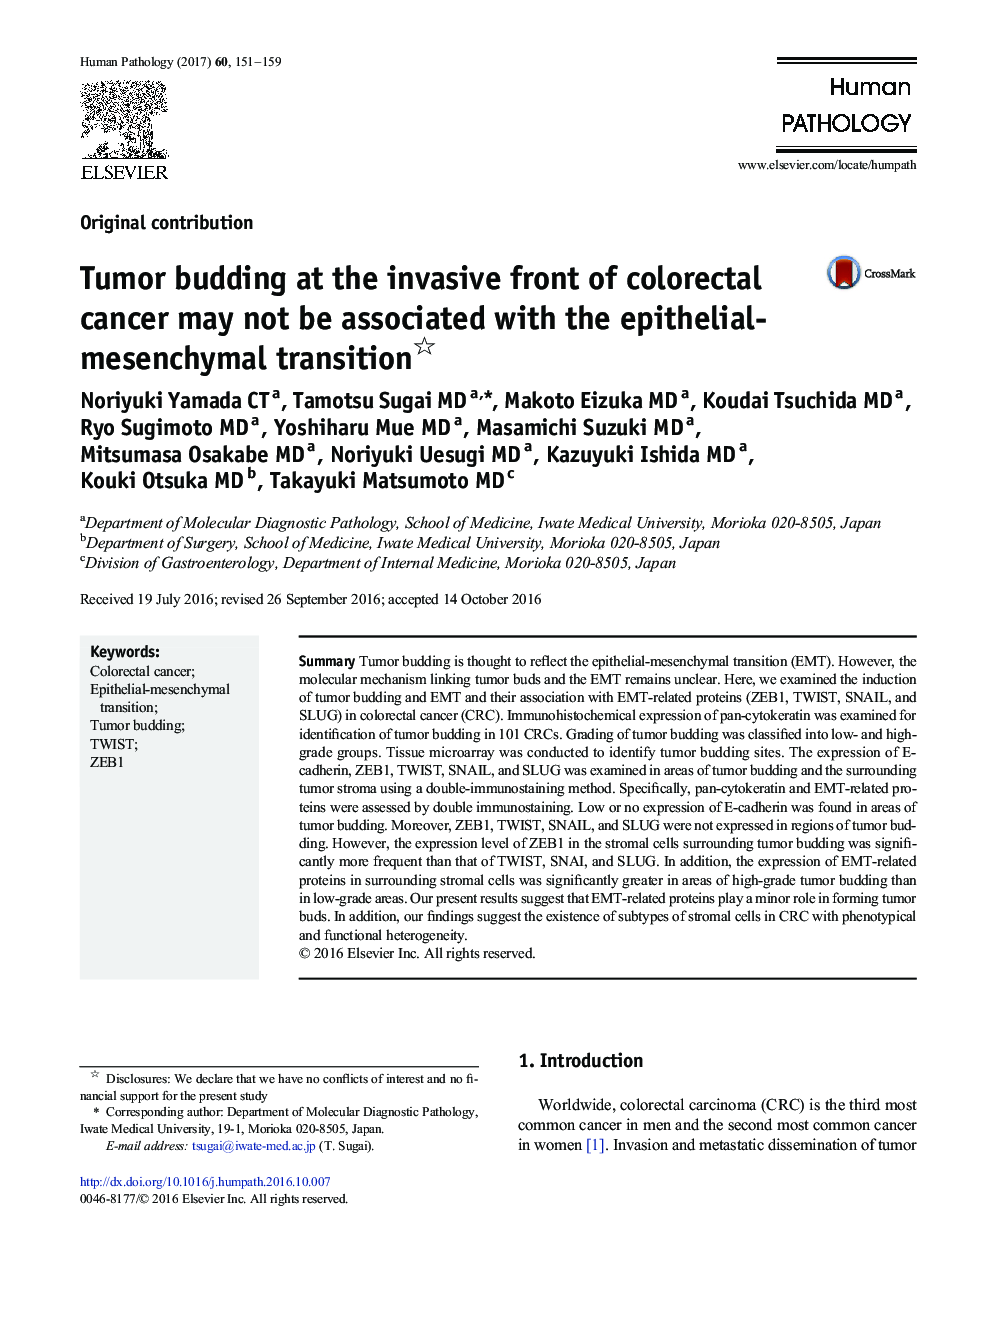 Original contributionTumor budding at the invasive front of colorectal cancer may not be associated with the epithelial-mesenchymal transition